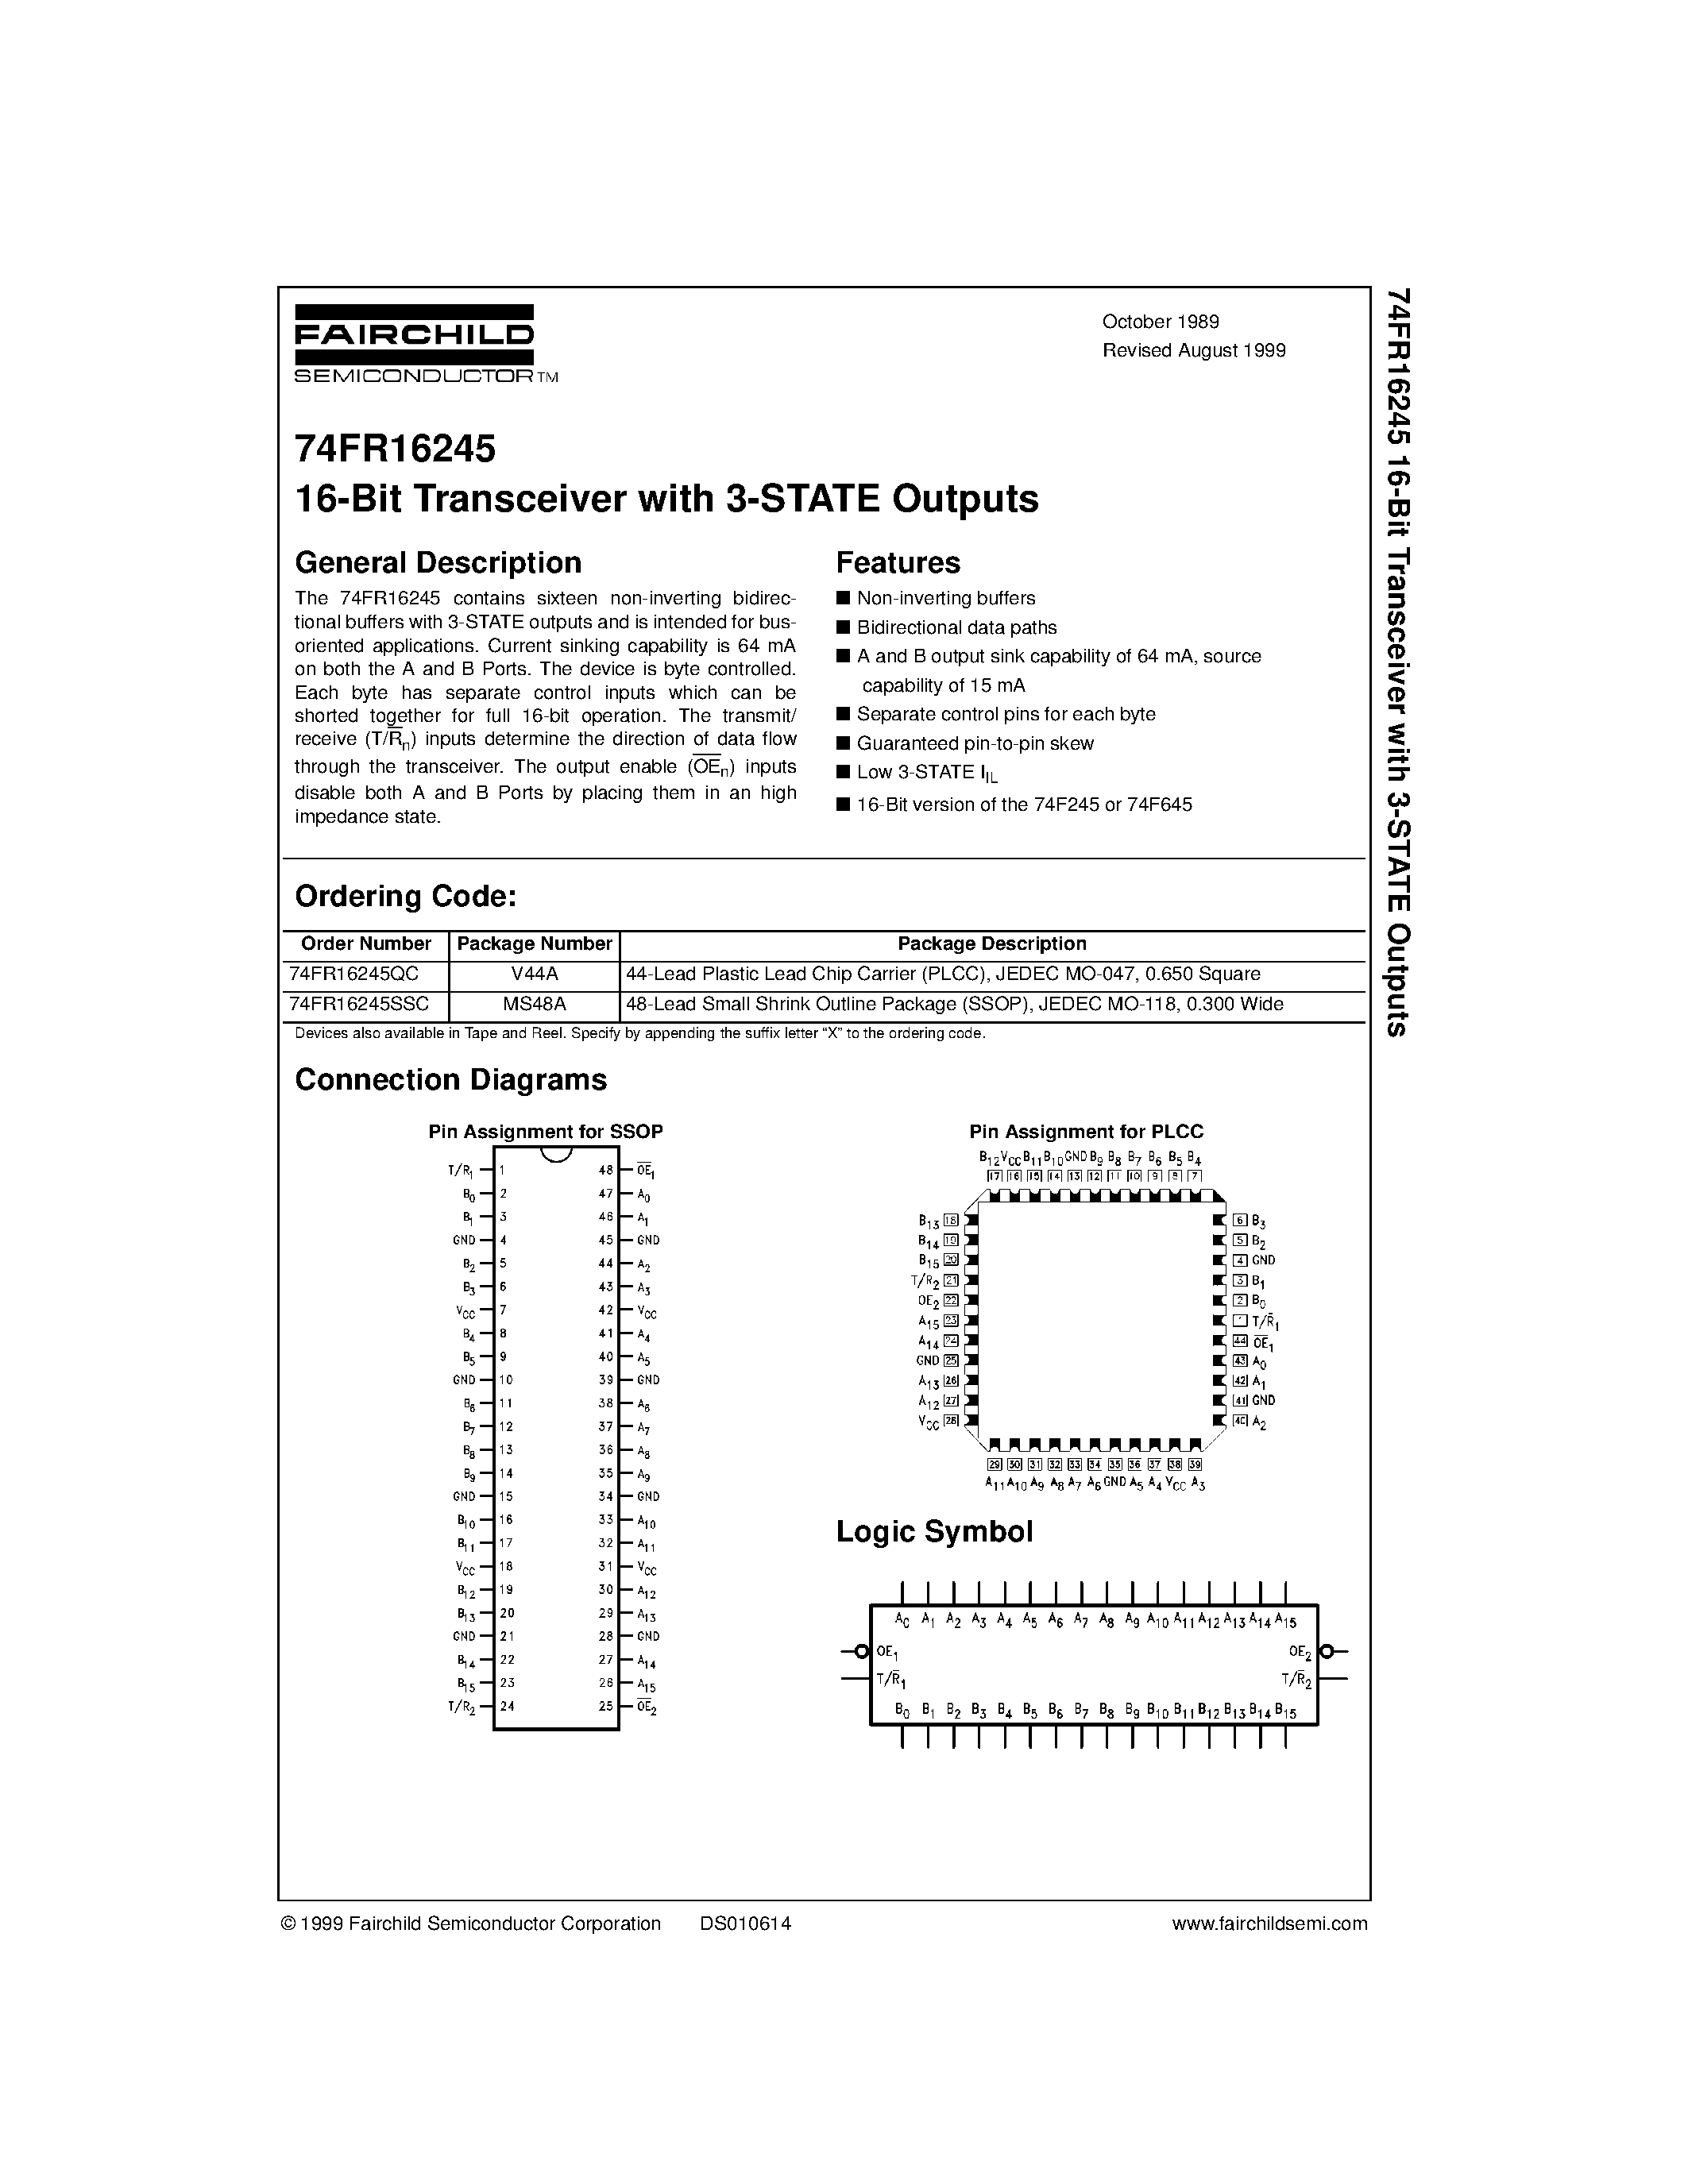 Datasheet 74FR16245QC - 16-Bit Transceiver with 3-STATE Outputs page 1